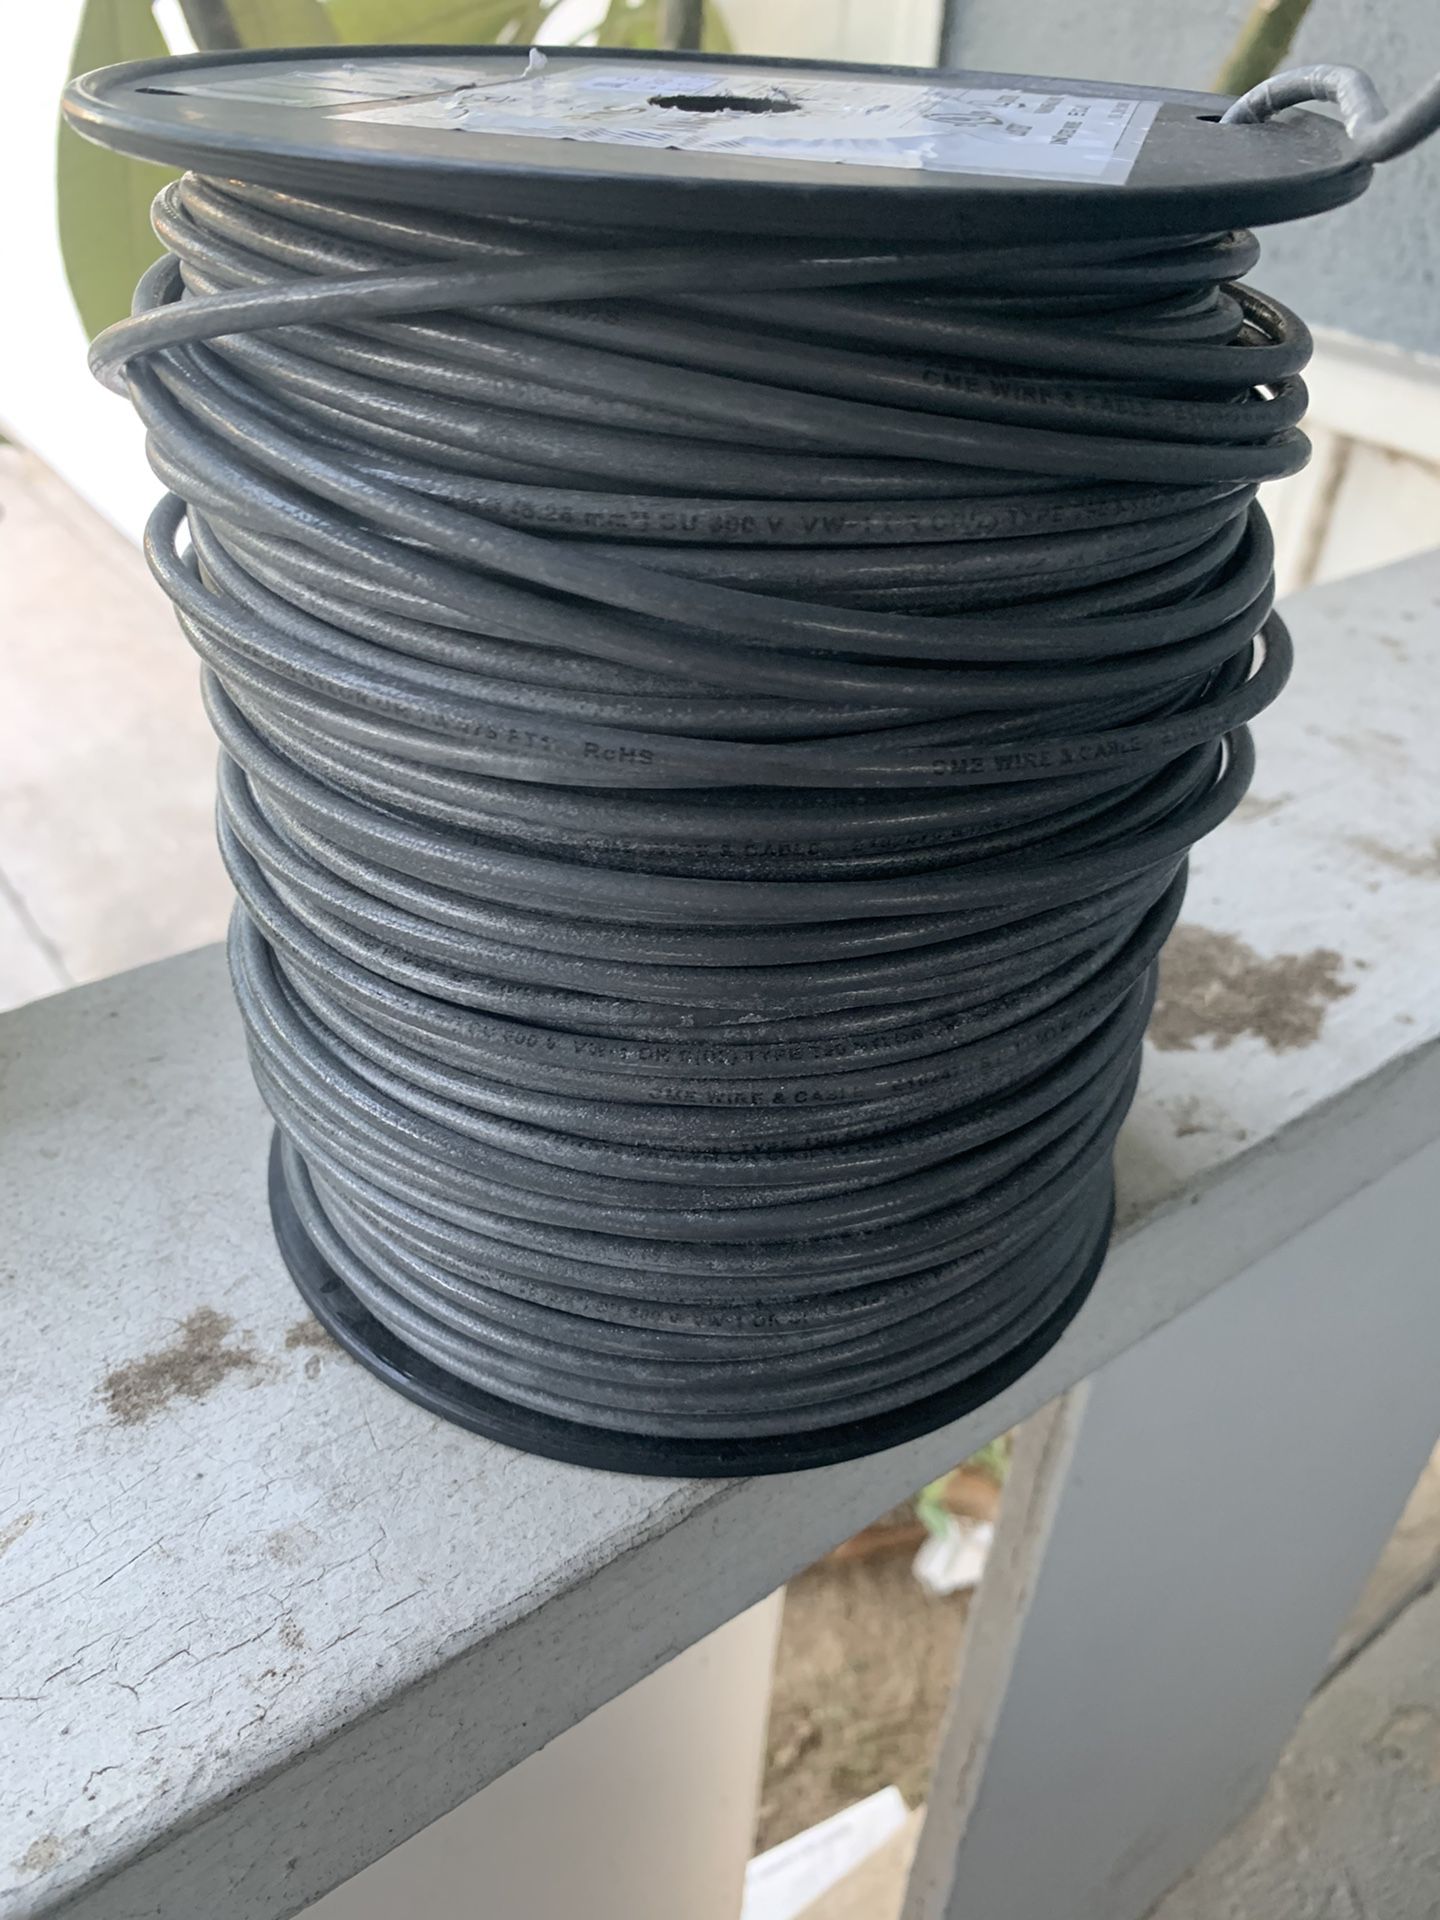 #10 AWG wire